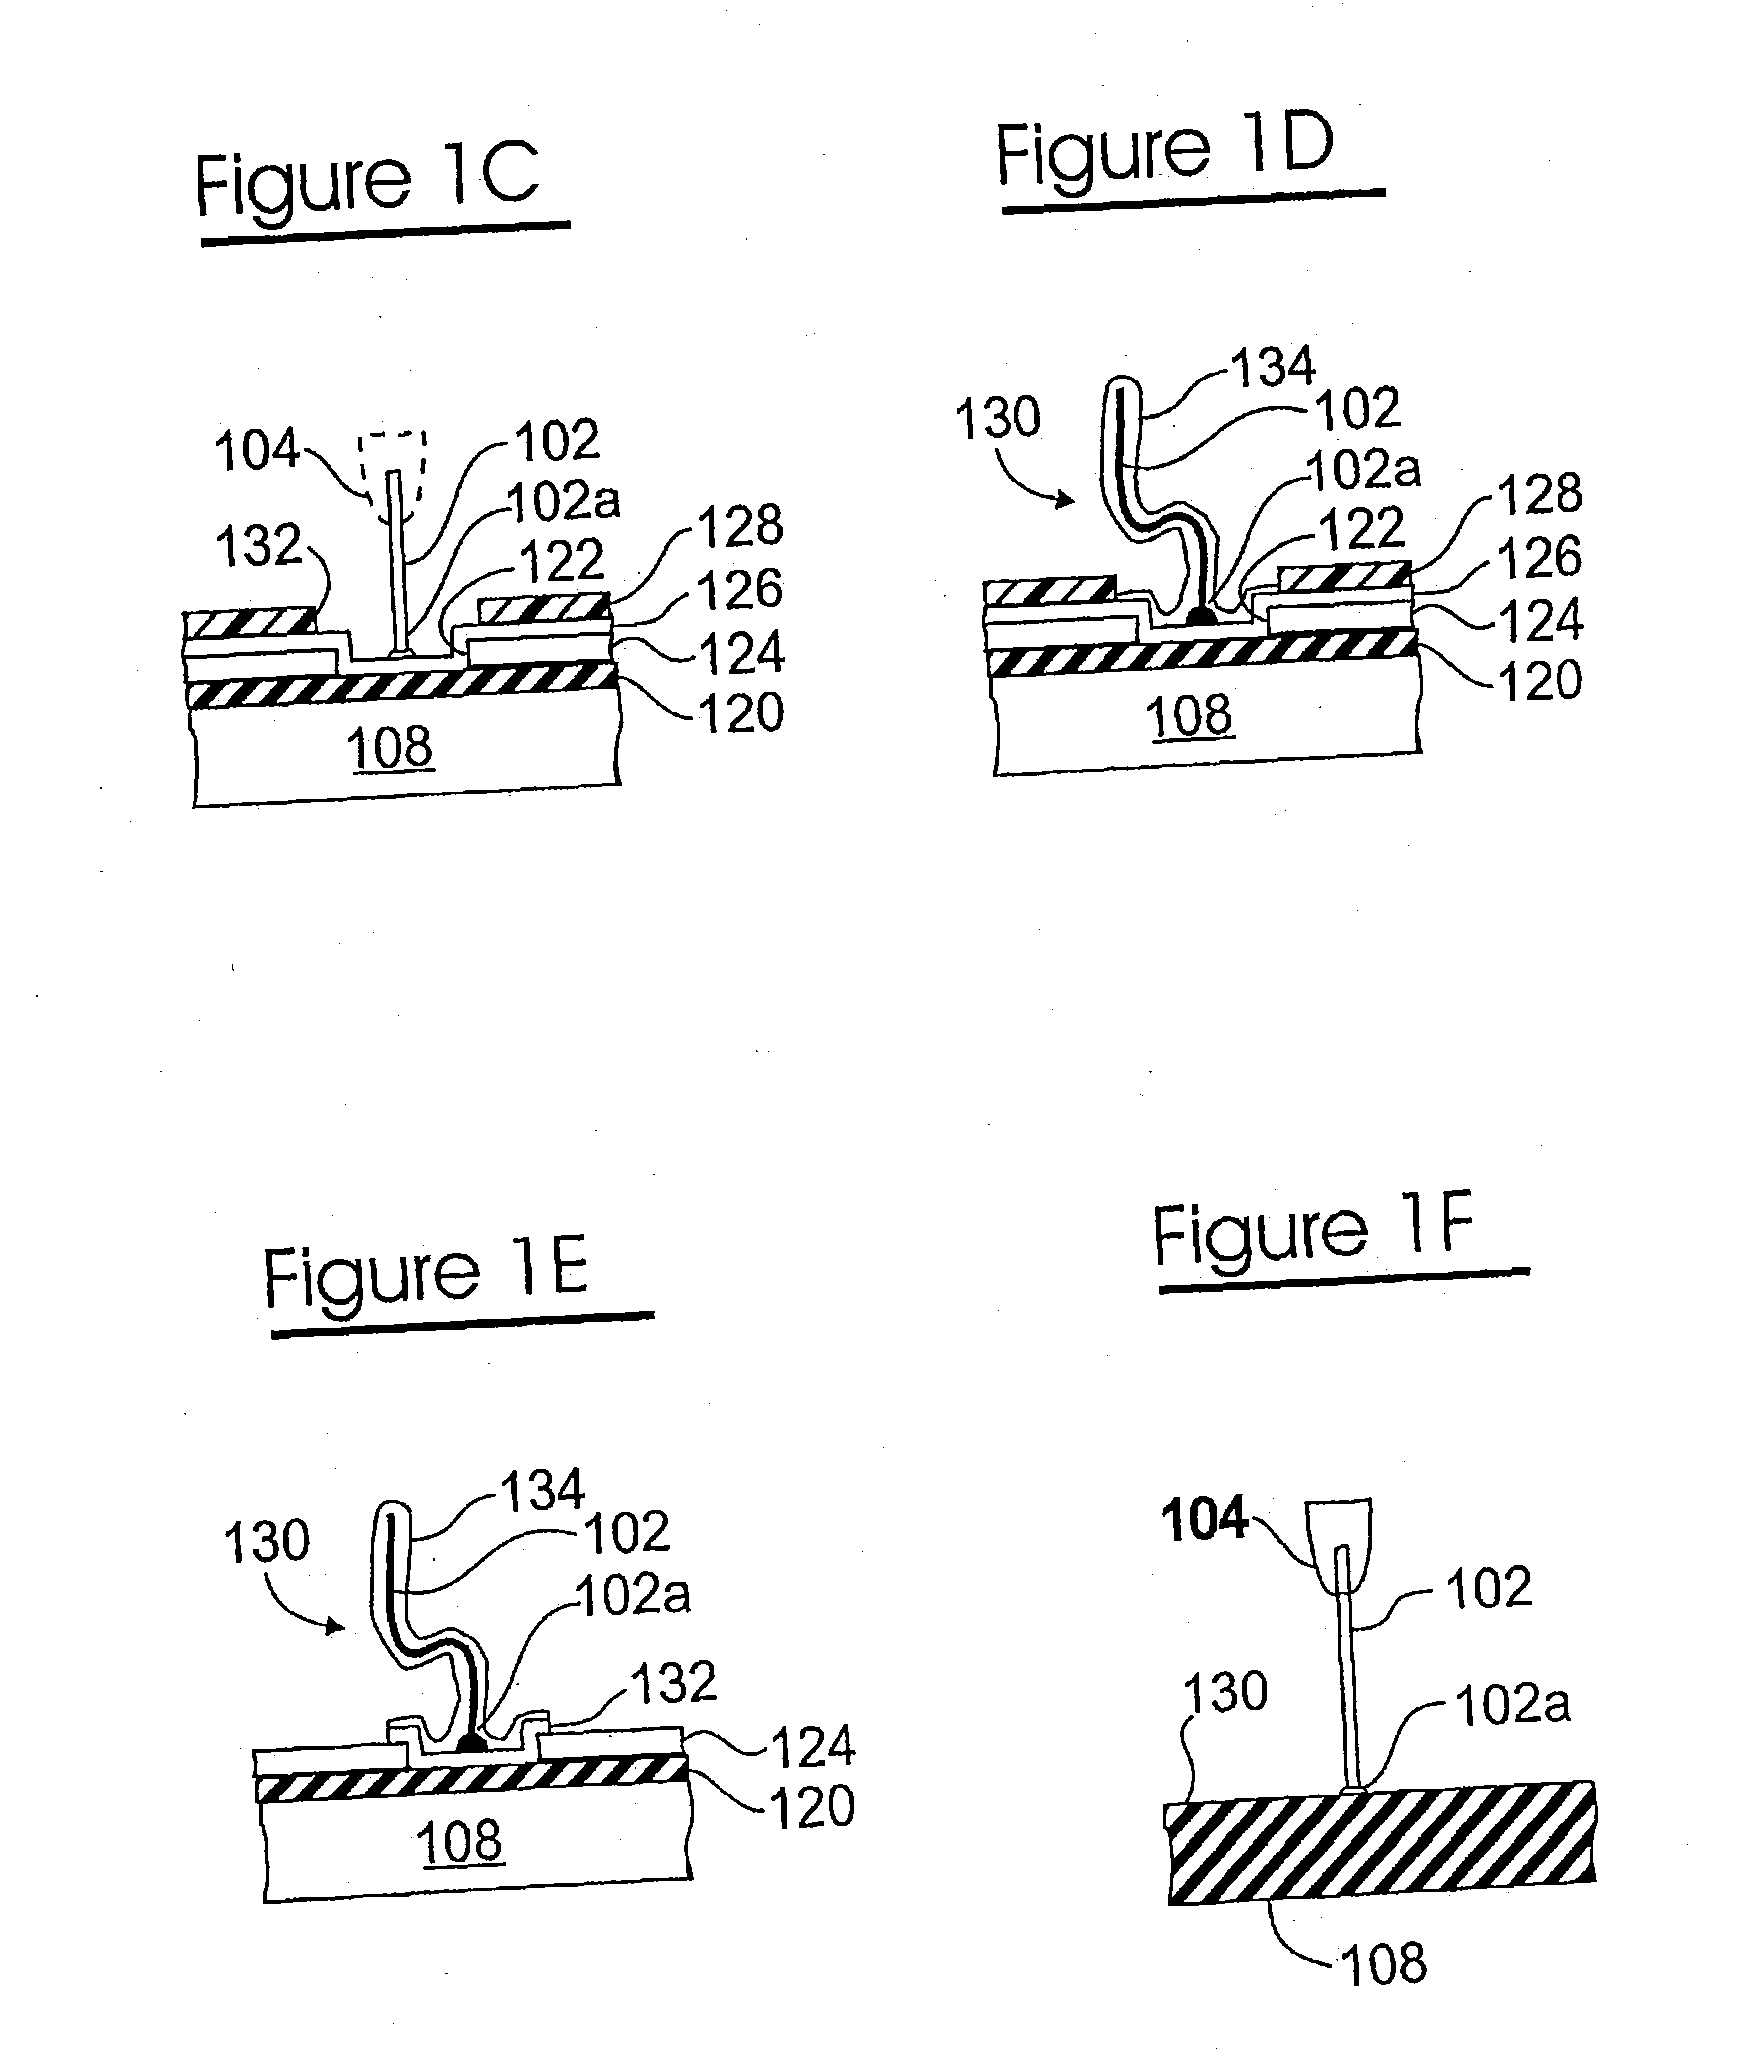 Method Of Wirebonding That Utilizes A Gas Flow Within A Capillary From Which A Wire Is Played Out